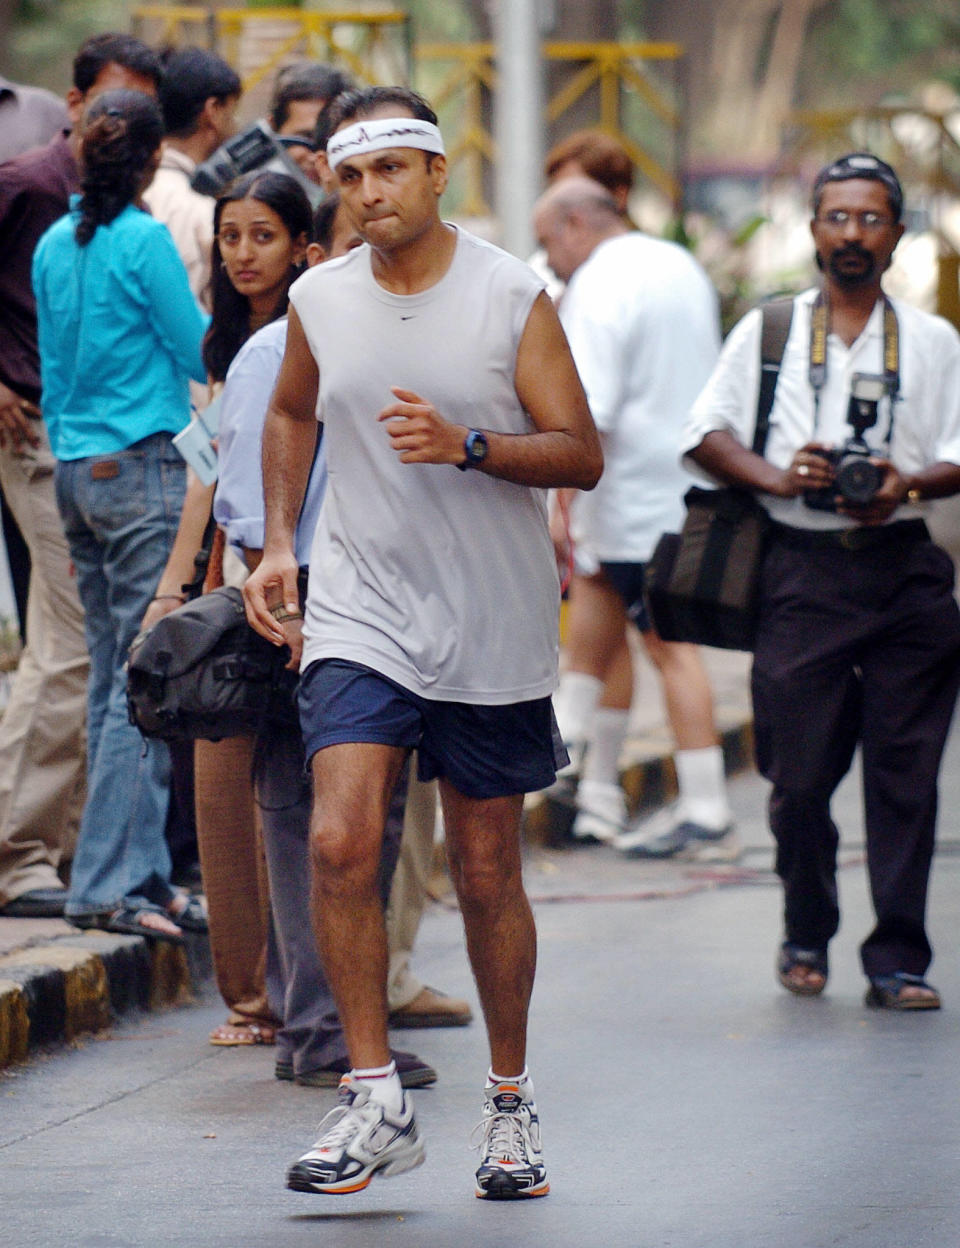 Anil Ambani, head of India's largest private sector company Reliance Industries, runs from his home to a polling stating to be one of the first to cast his vote when polling stations opened at 7:00 am (0130 GMT) in Bombay, 26 April 2004. Ambani, a marathon runner, jogged to and from the polling station in southern Bombay as the third phase of India's general elections, the world's largest democratic exercise, got under way with more than 172 million people eligible to vote for 1,278 candidates in 137 constituencies. AFP PHOTO/Rob ELLIOTT